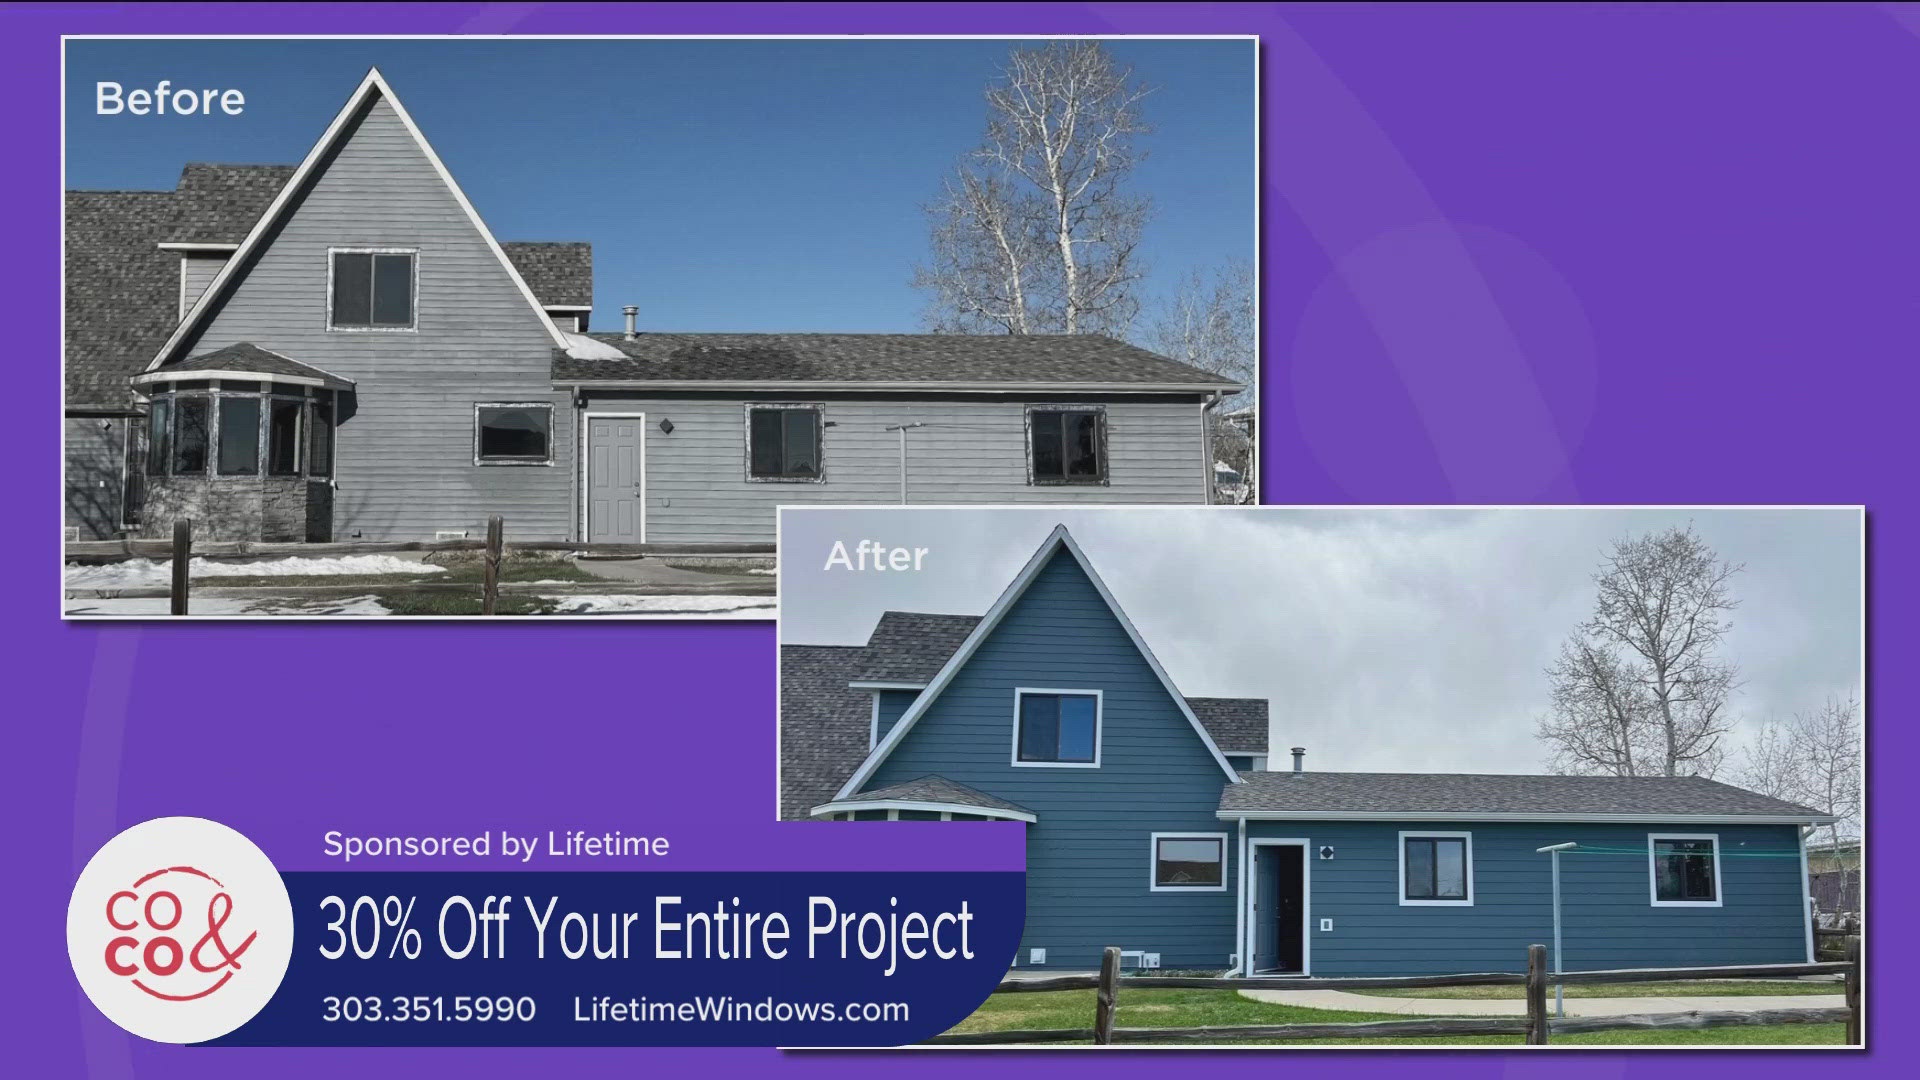 Get 30% off your entire siding project, that's with 24 months of no interest and no payments. Call 303-351-5990 or go to LifetimeWindows.com to get started. *PAID*